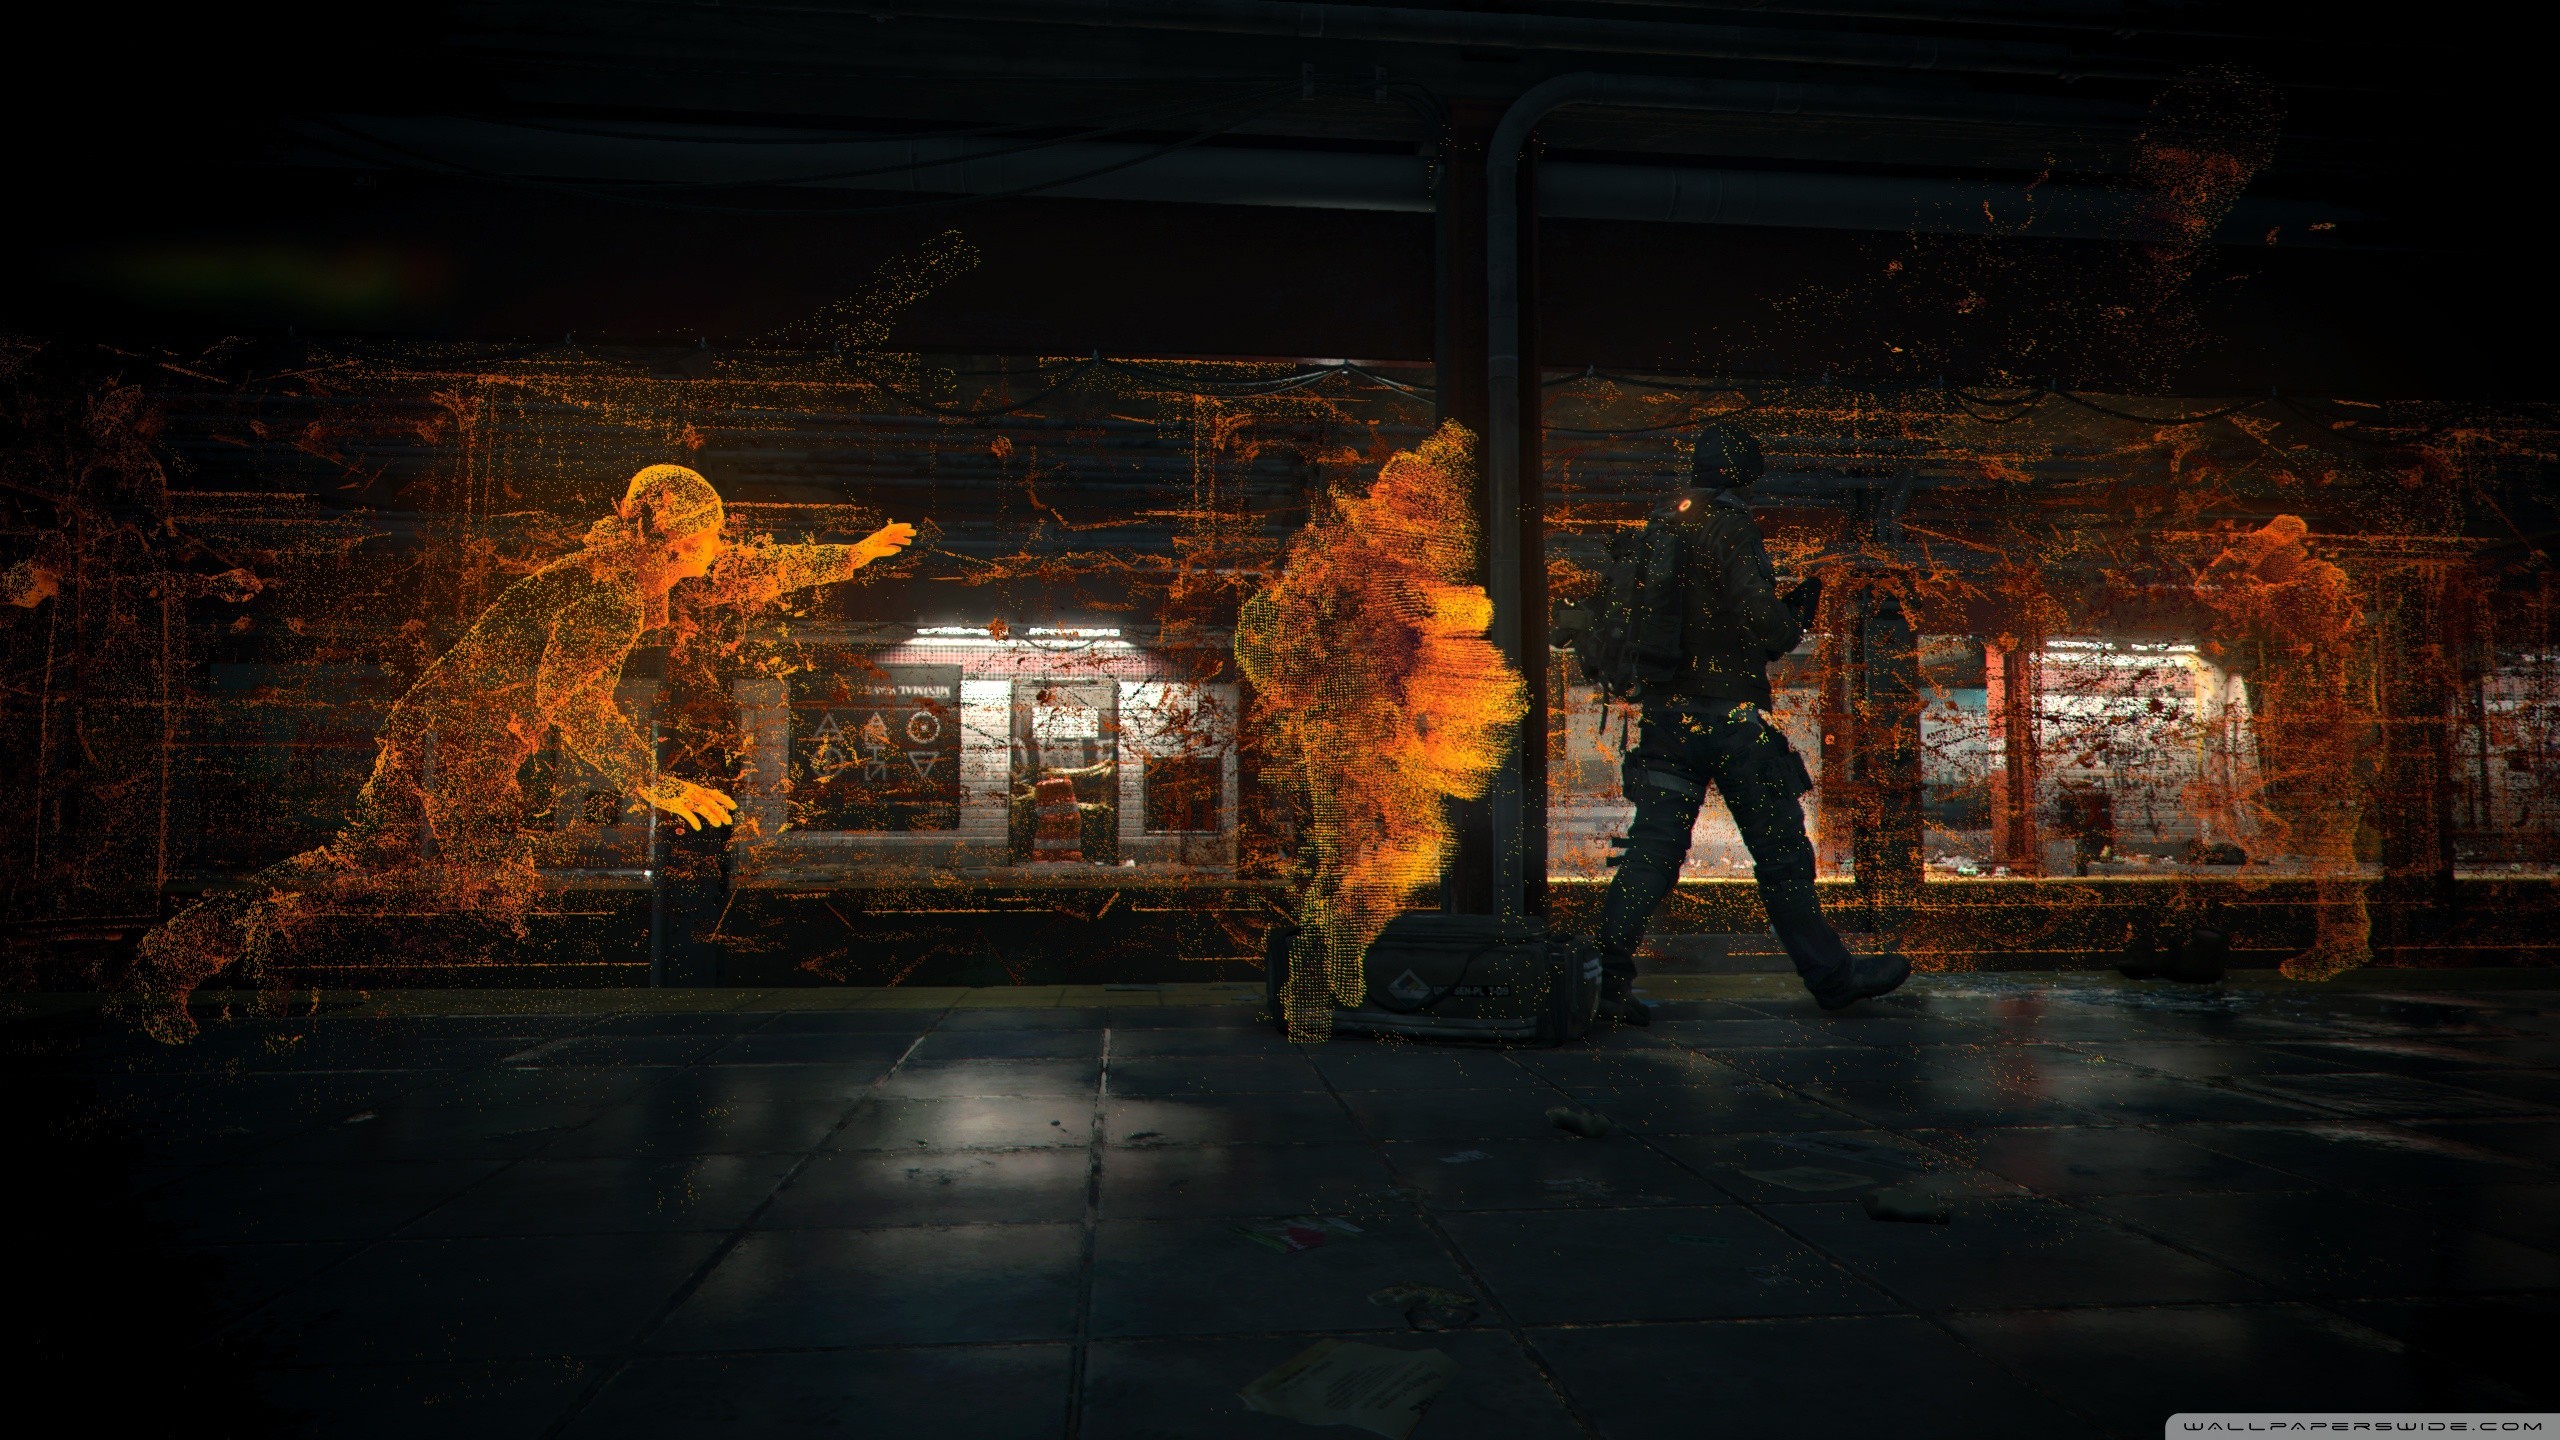 2560x1440  HD Background Tom Clancys The Division Game Fire Shooter Soldier  | HD Wallpapers | Pinterest